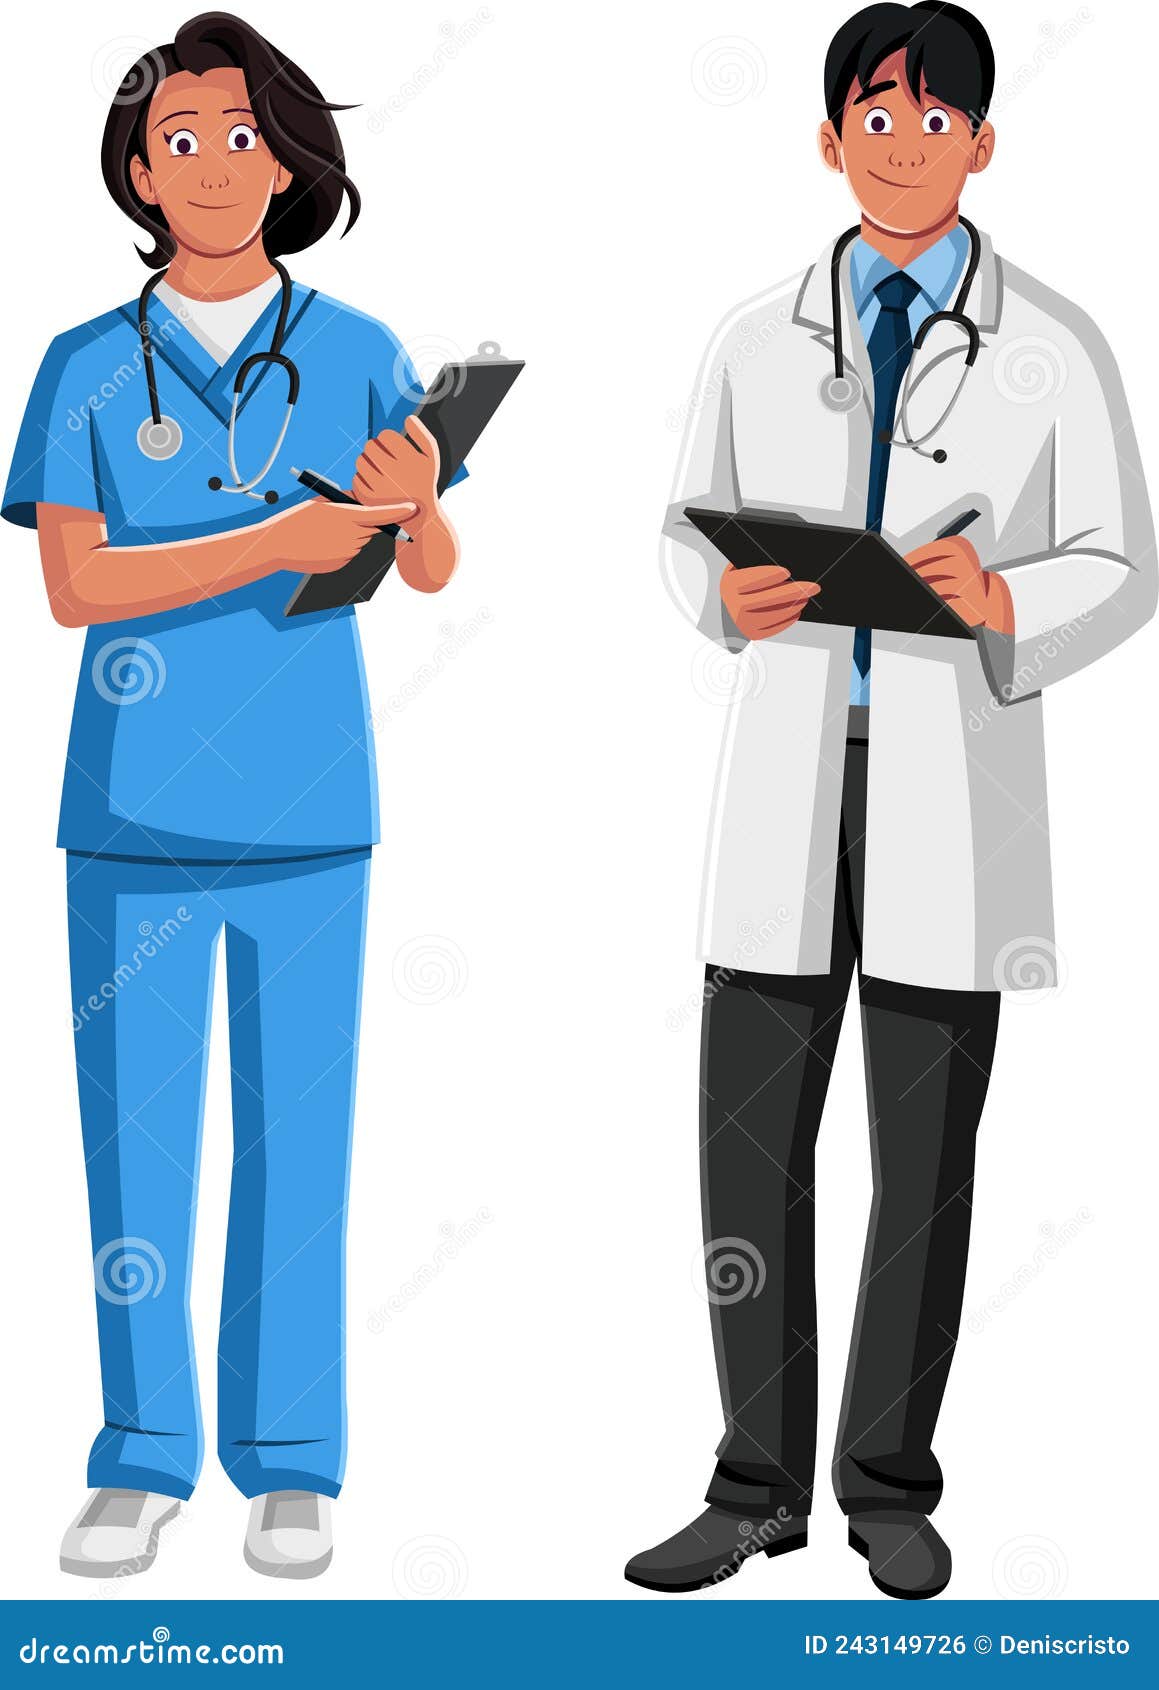 nurse and doctor with clipboards.